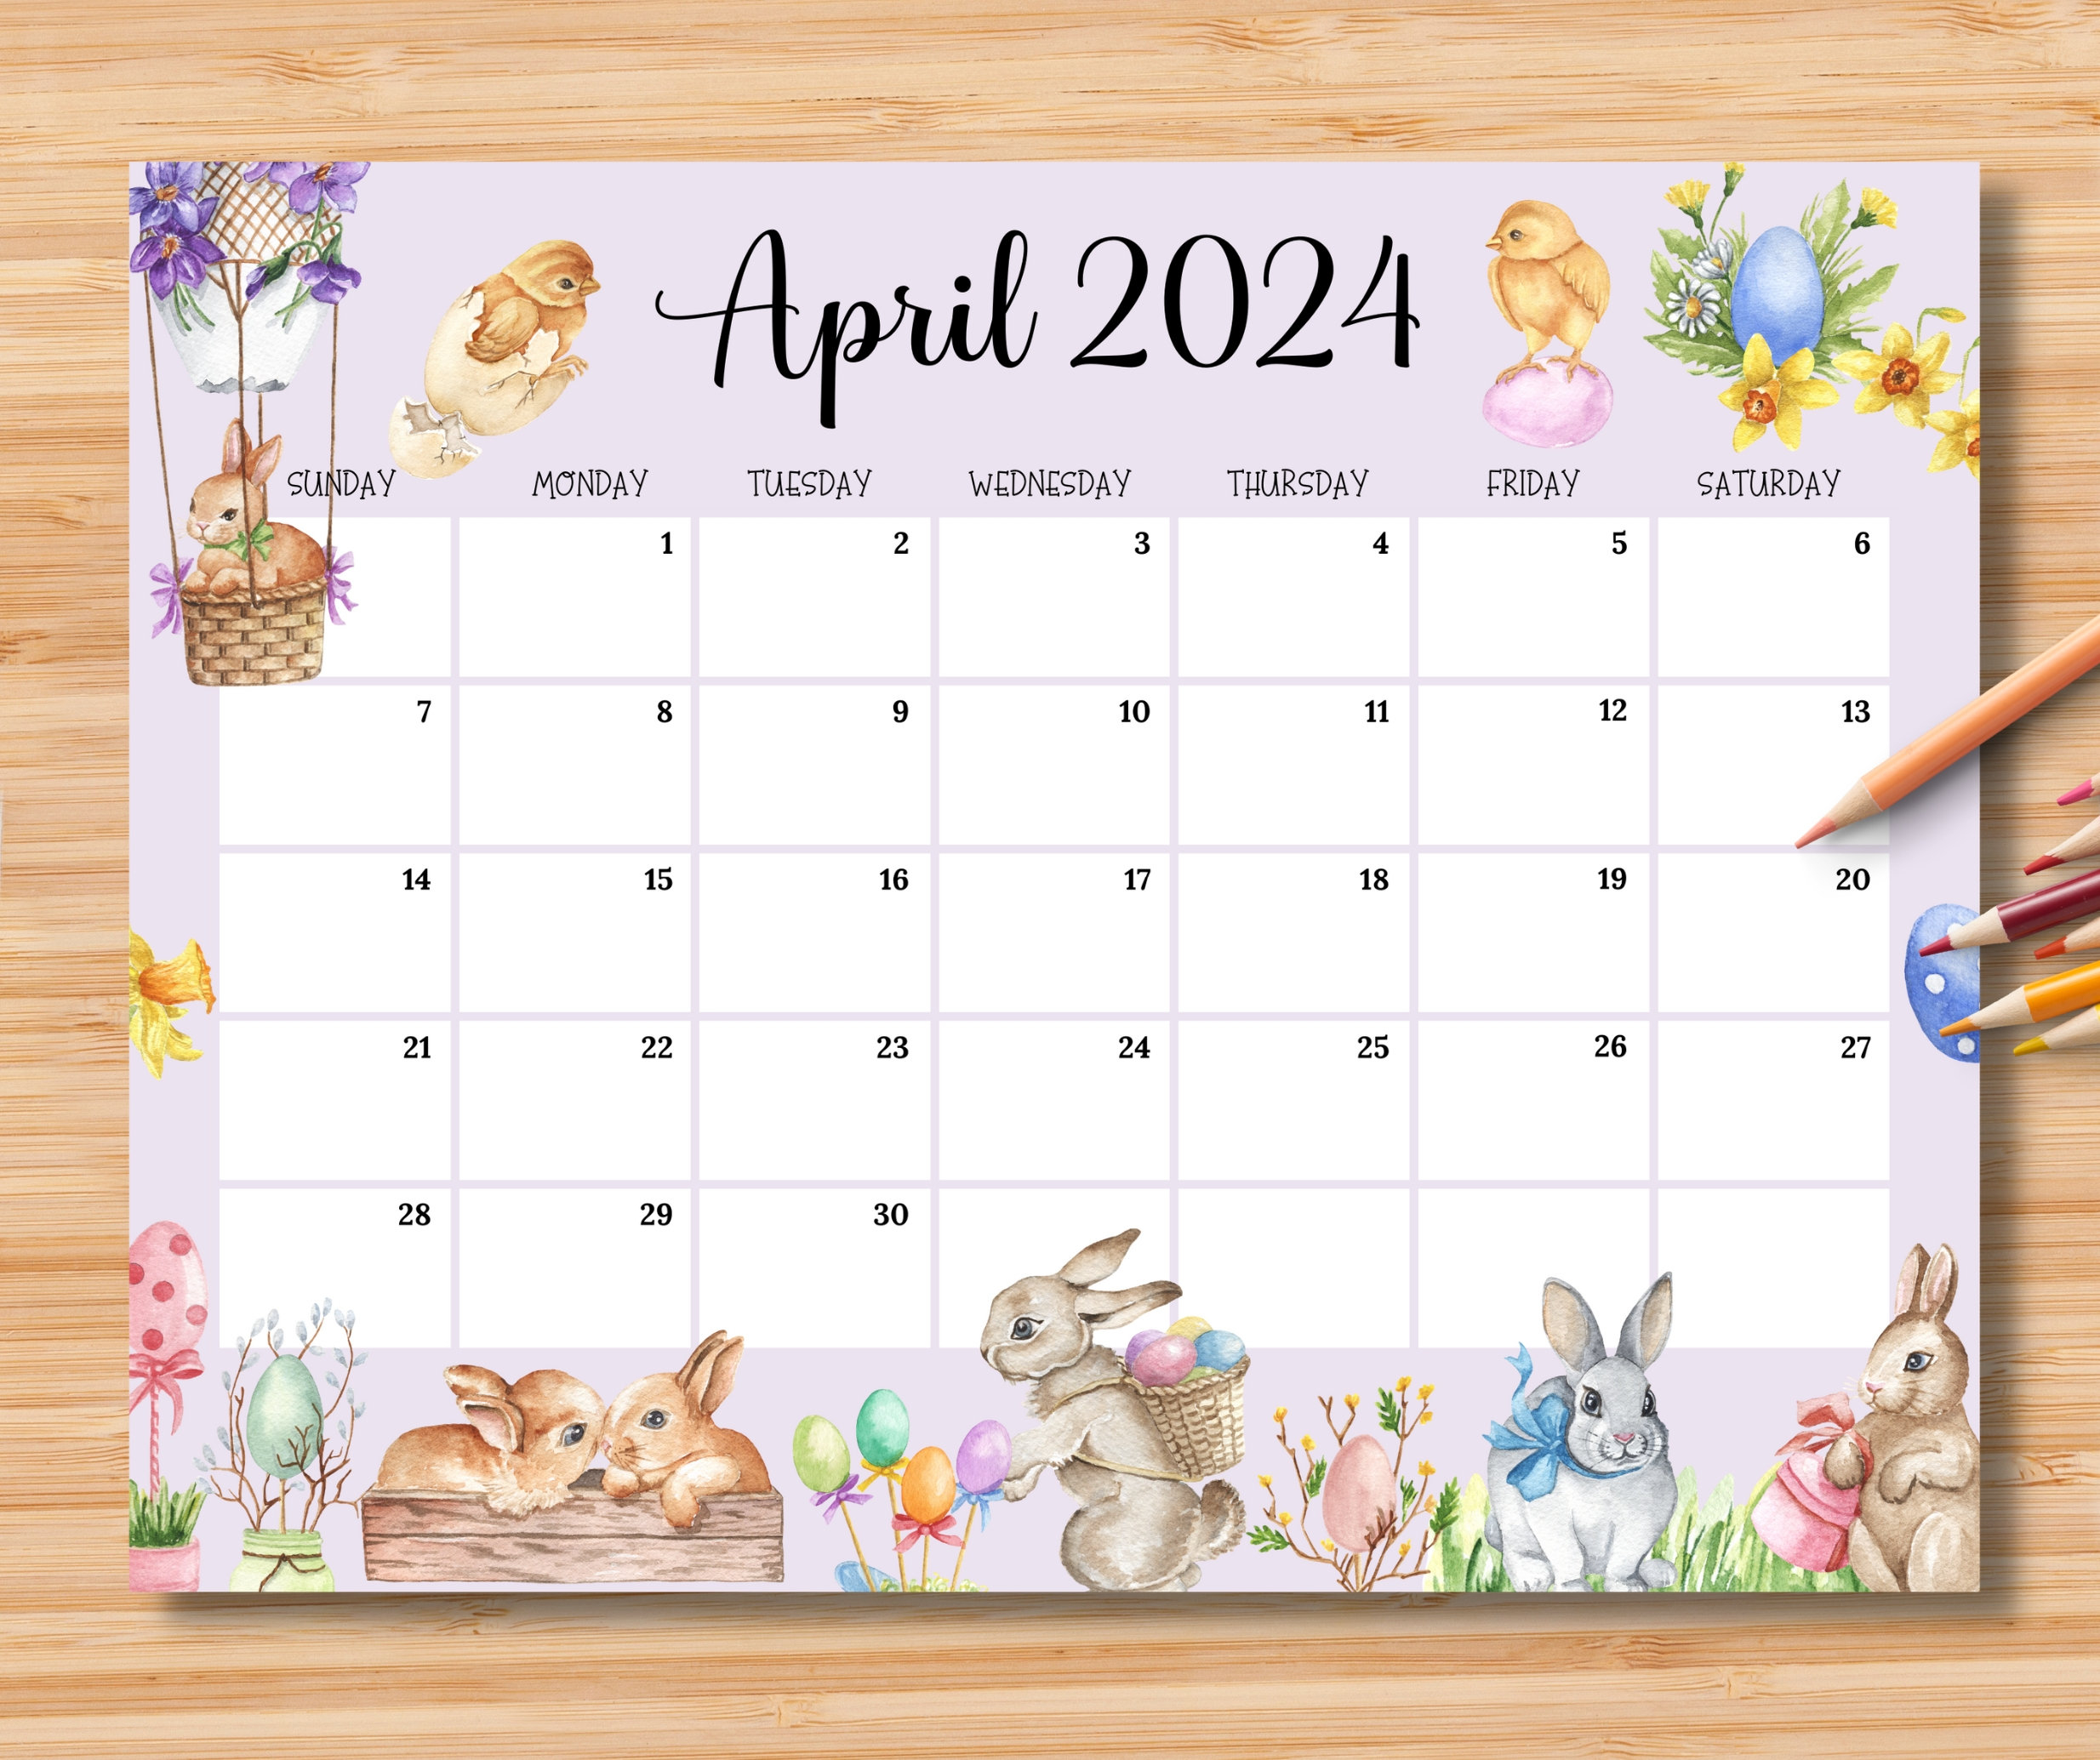 Editable April 2024 Calendar, Happy Easter Day 2024 With Cute for April 2024 Calendar Editable